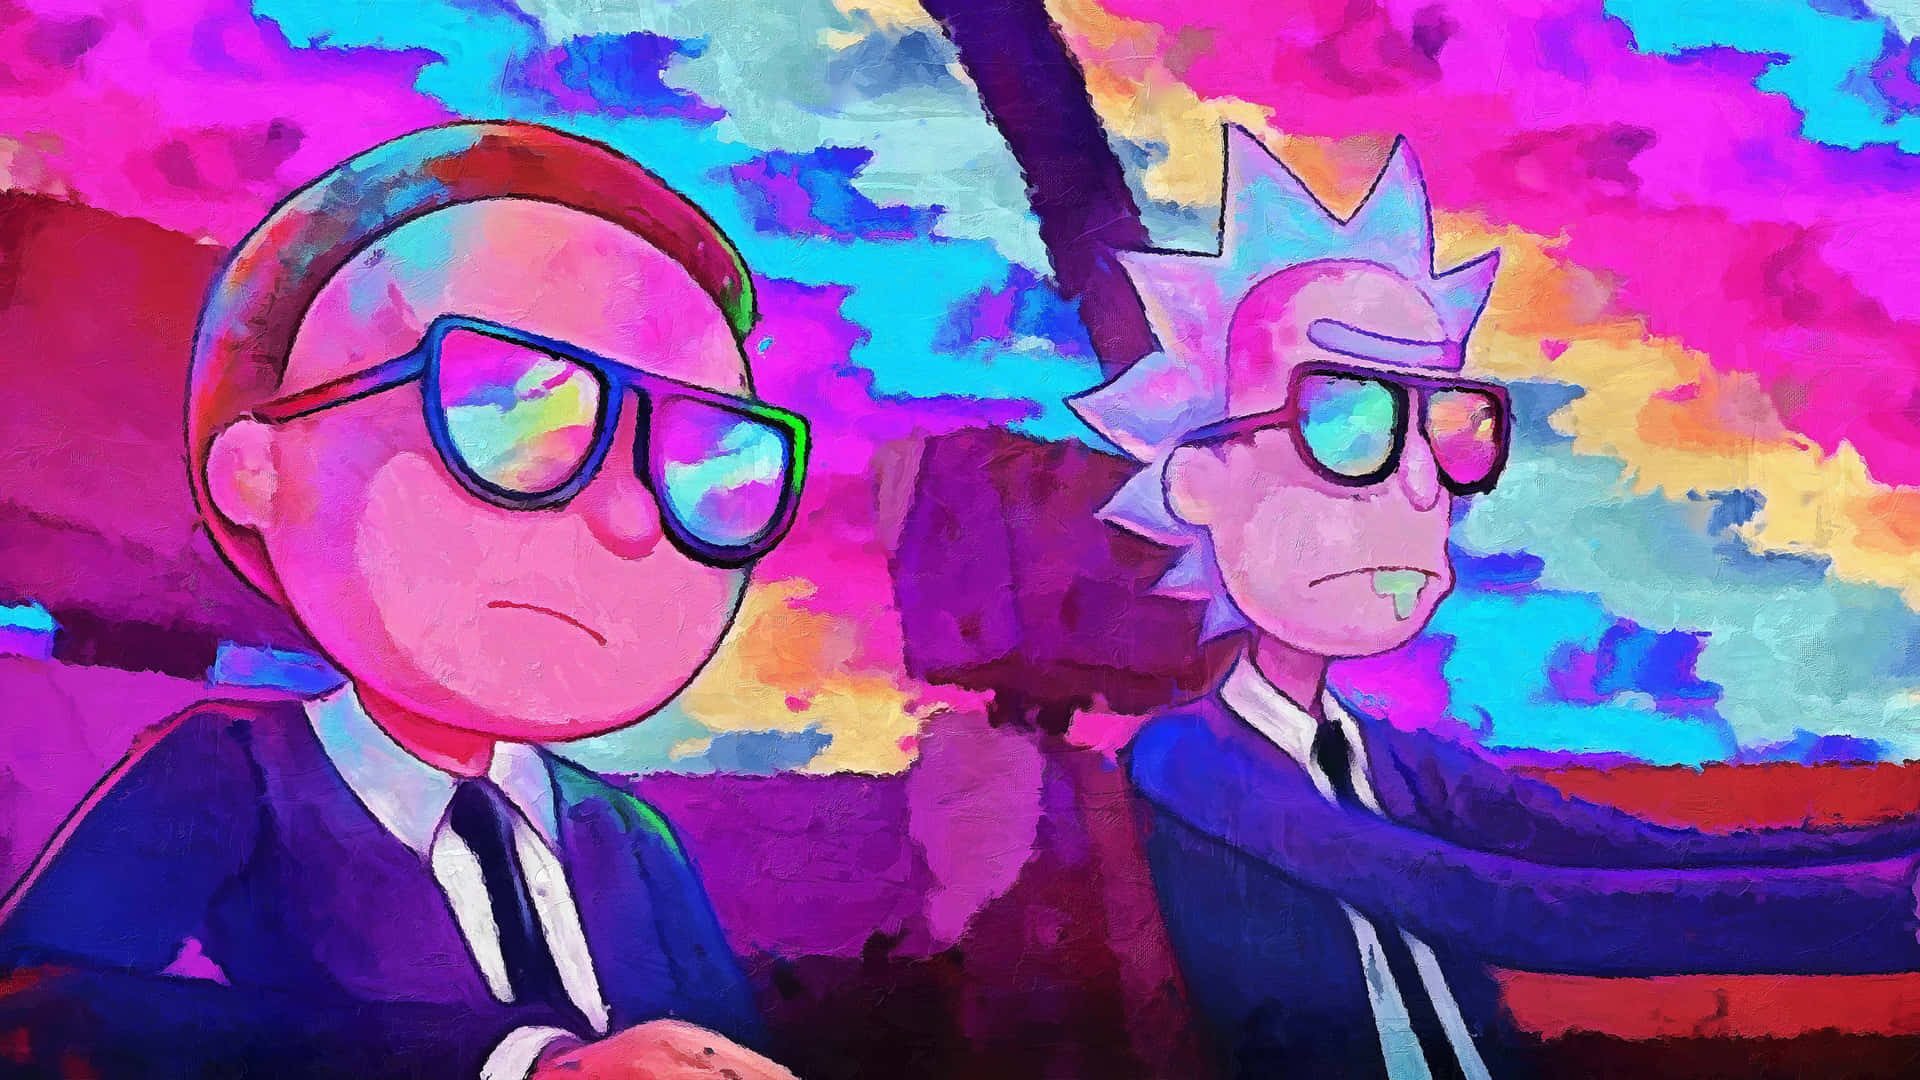 Rick and Morty, heads of a wild interdimensional adventure Wallpaper